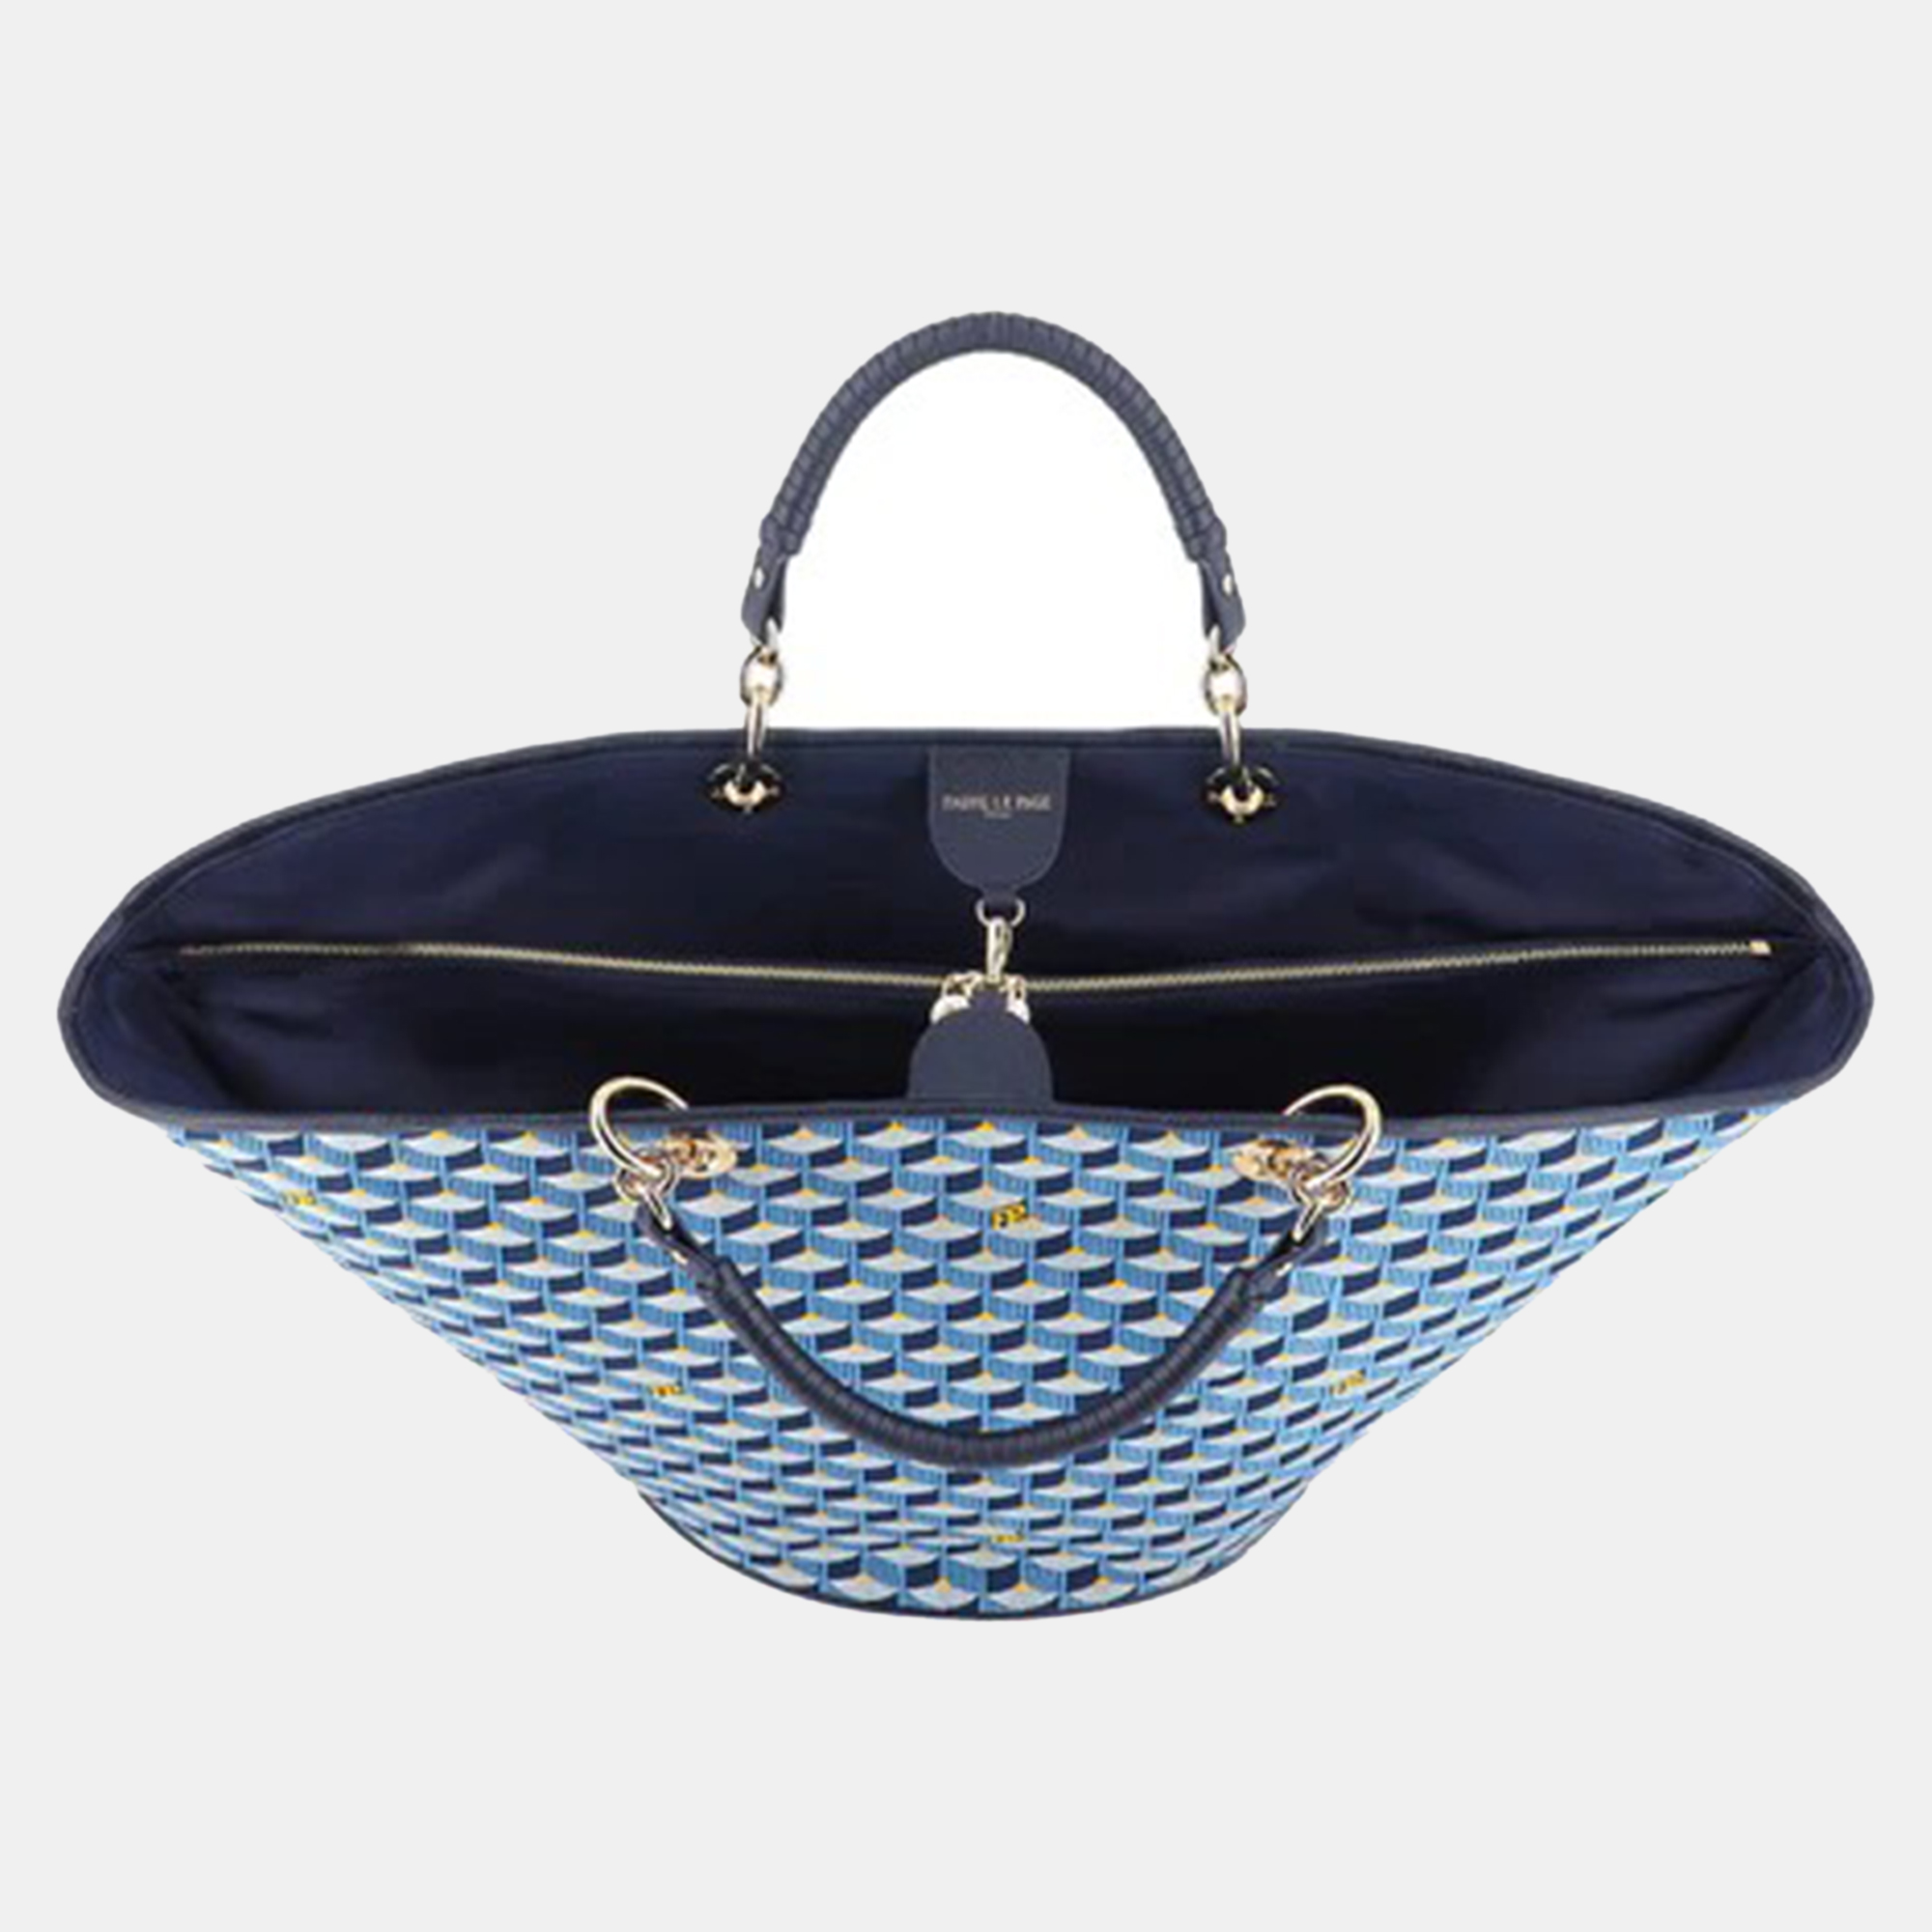 Faure Le Page Navy Blue Leather Tote